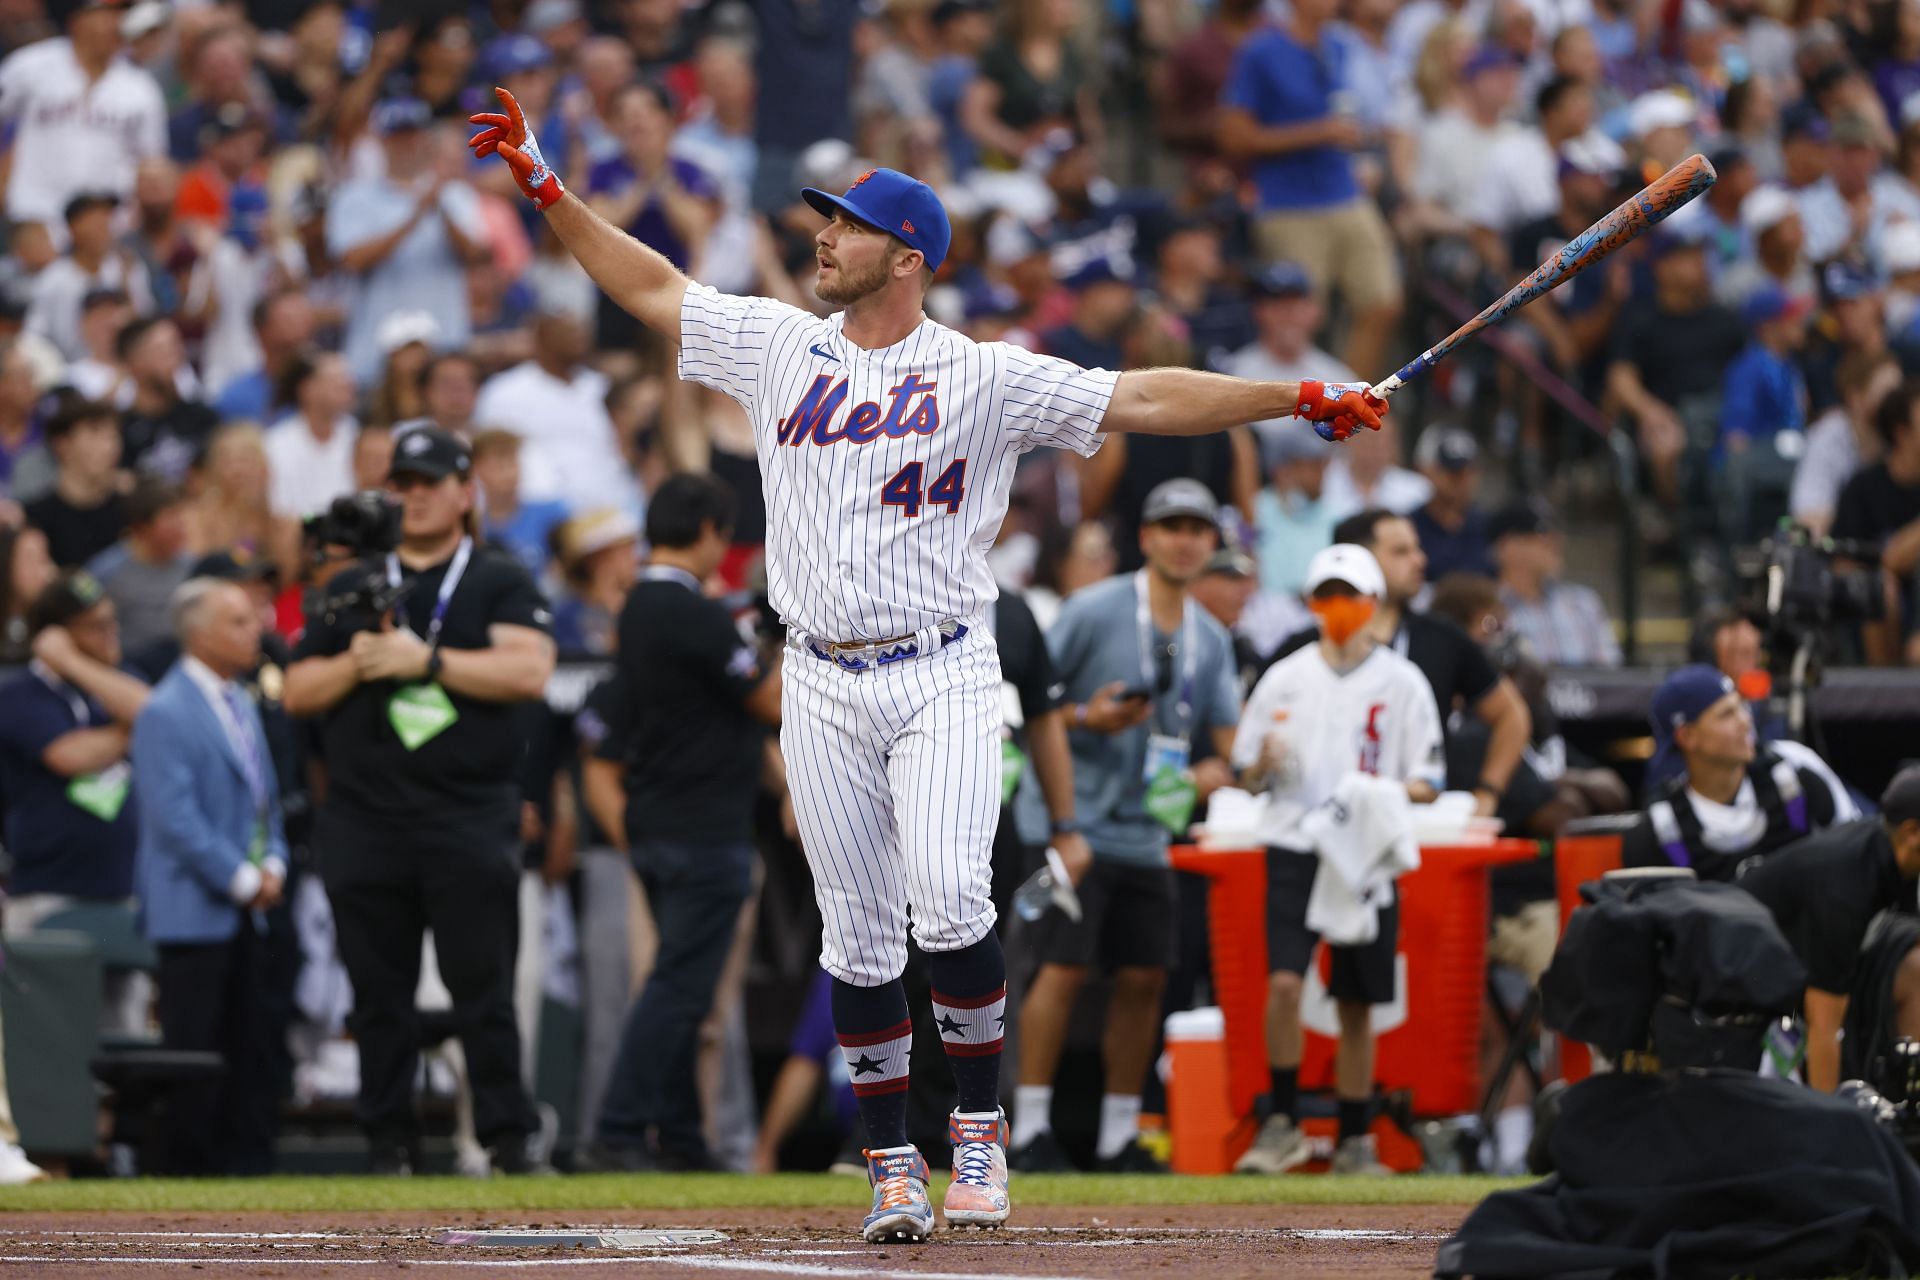 All-Star Pete Alonso winning his second Home Run Derby